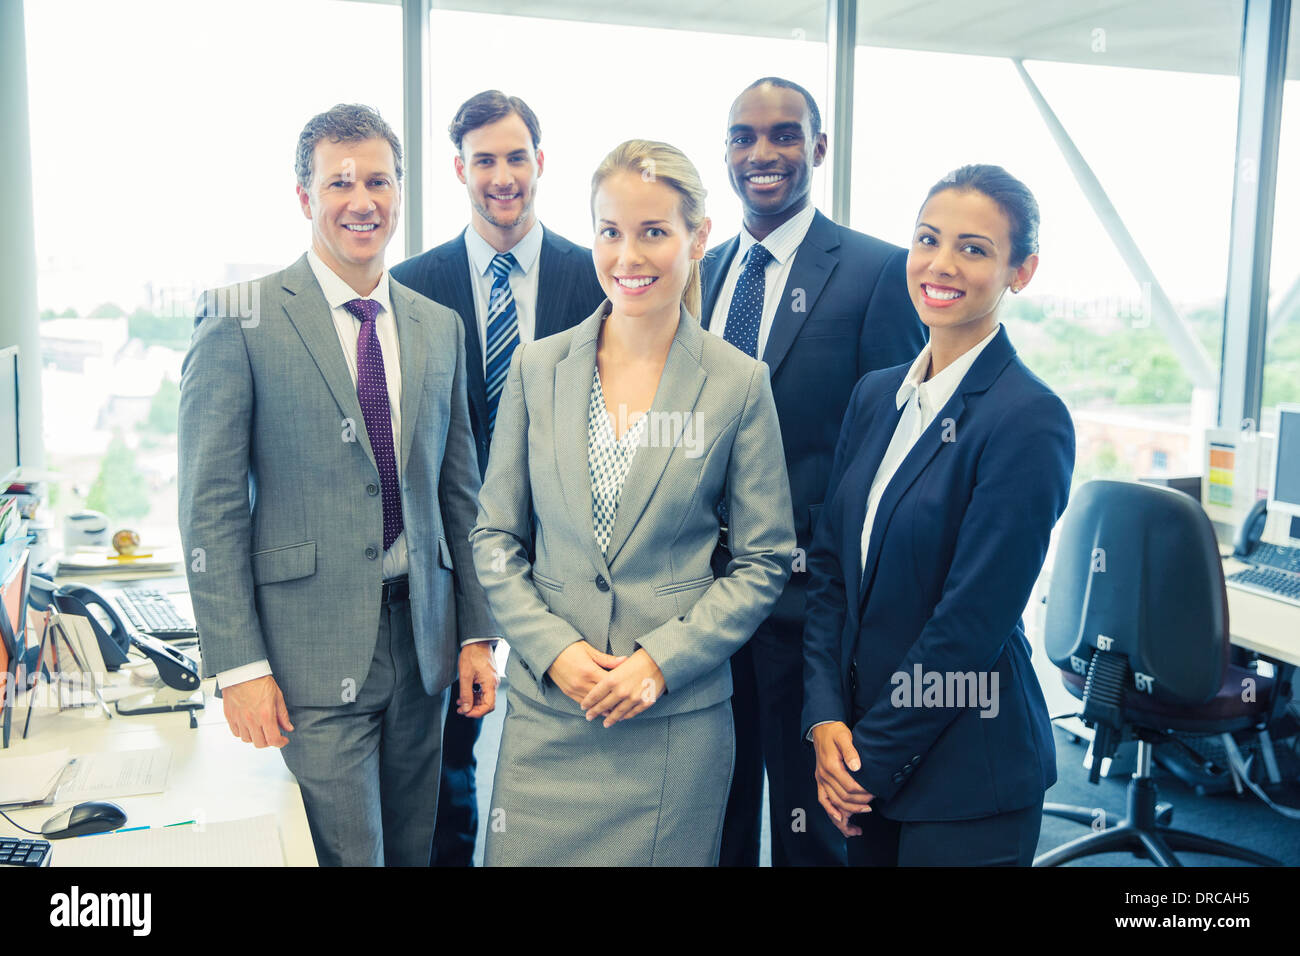 Business people smiling in office Banque D'Images